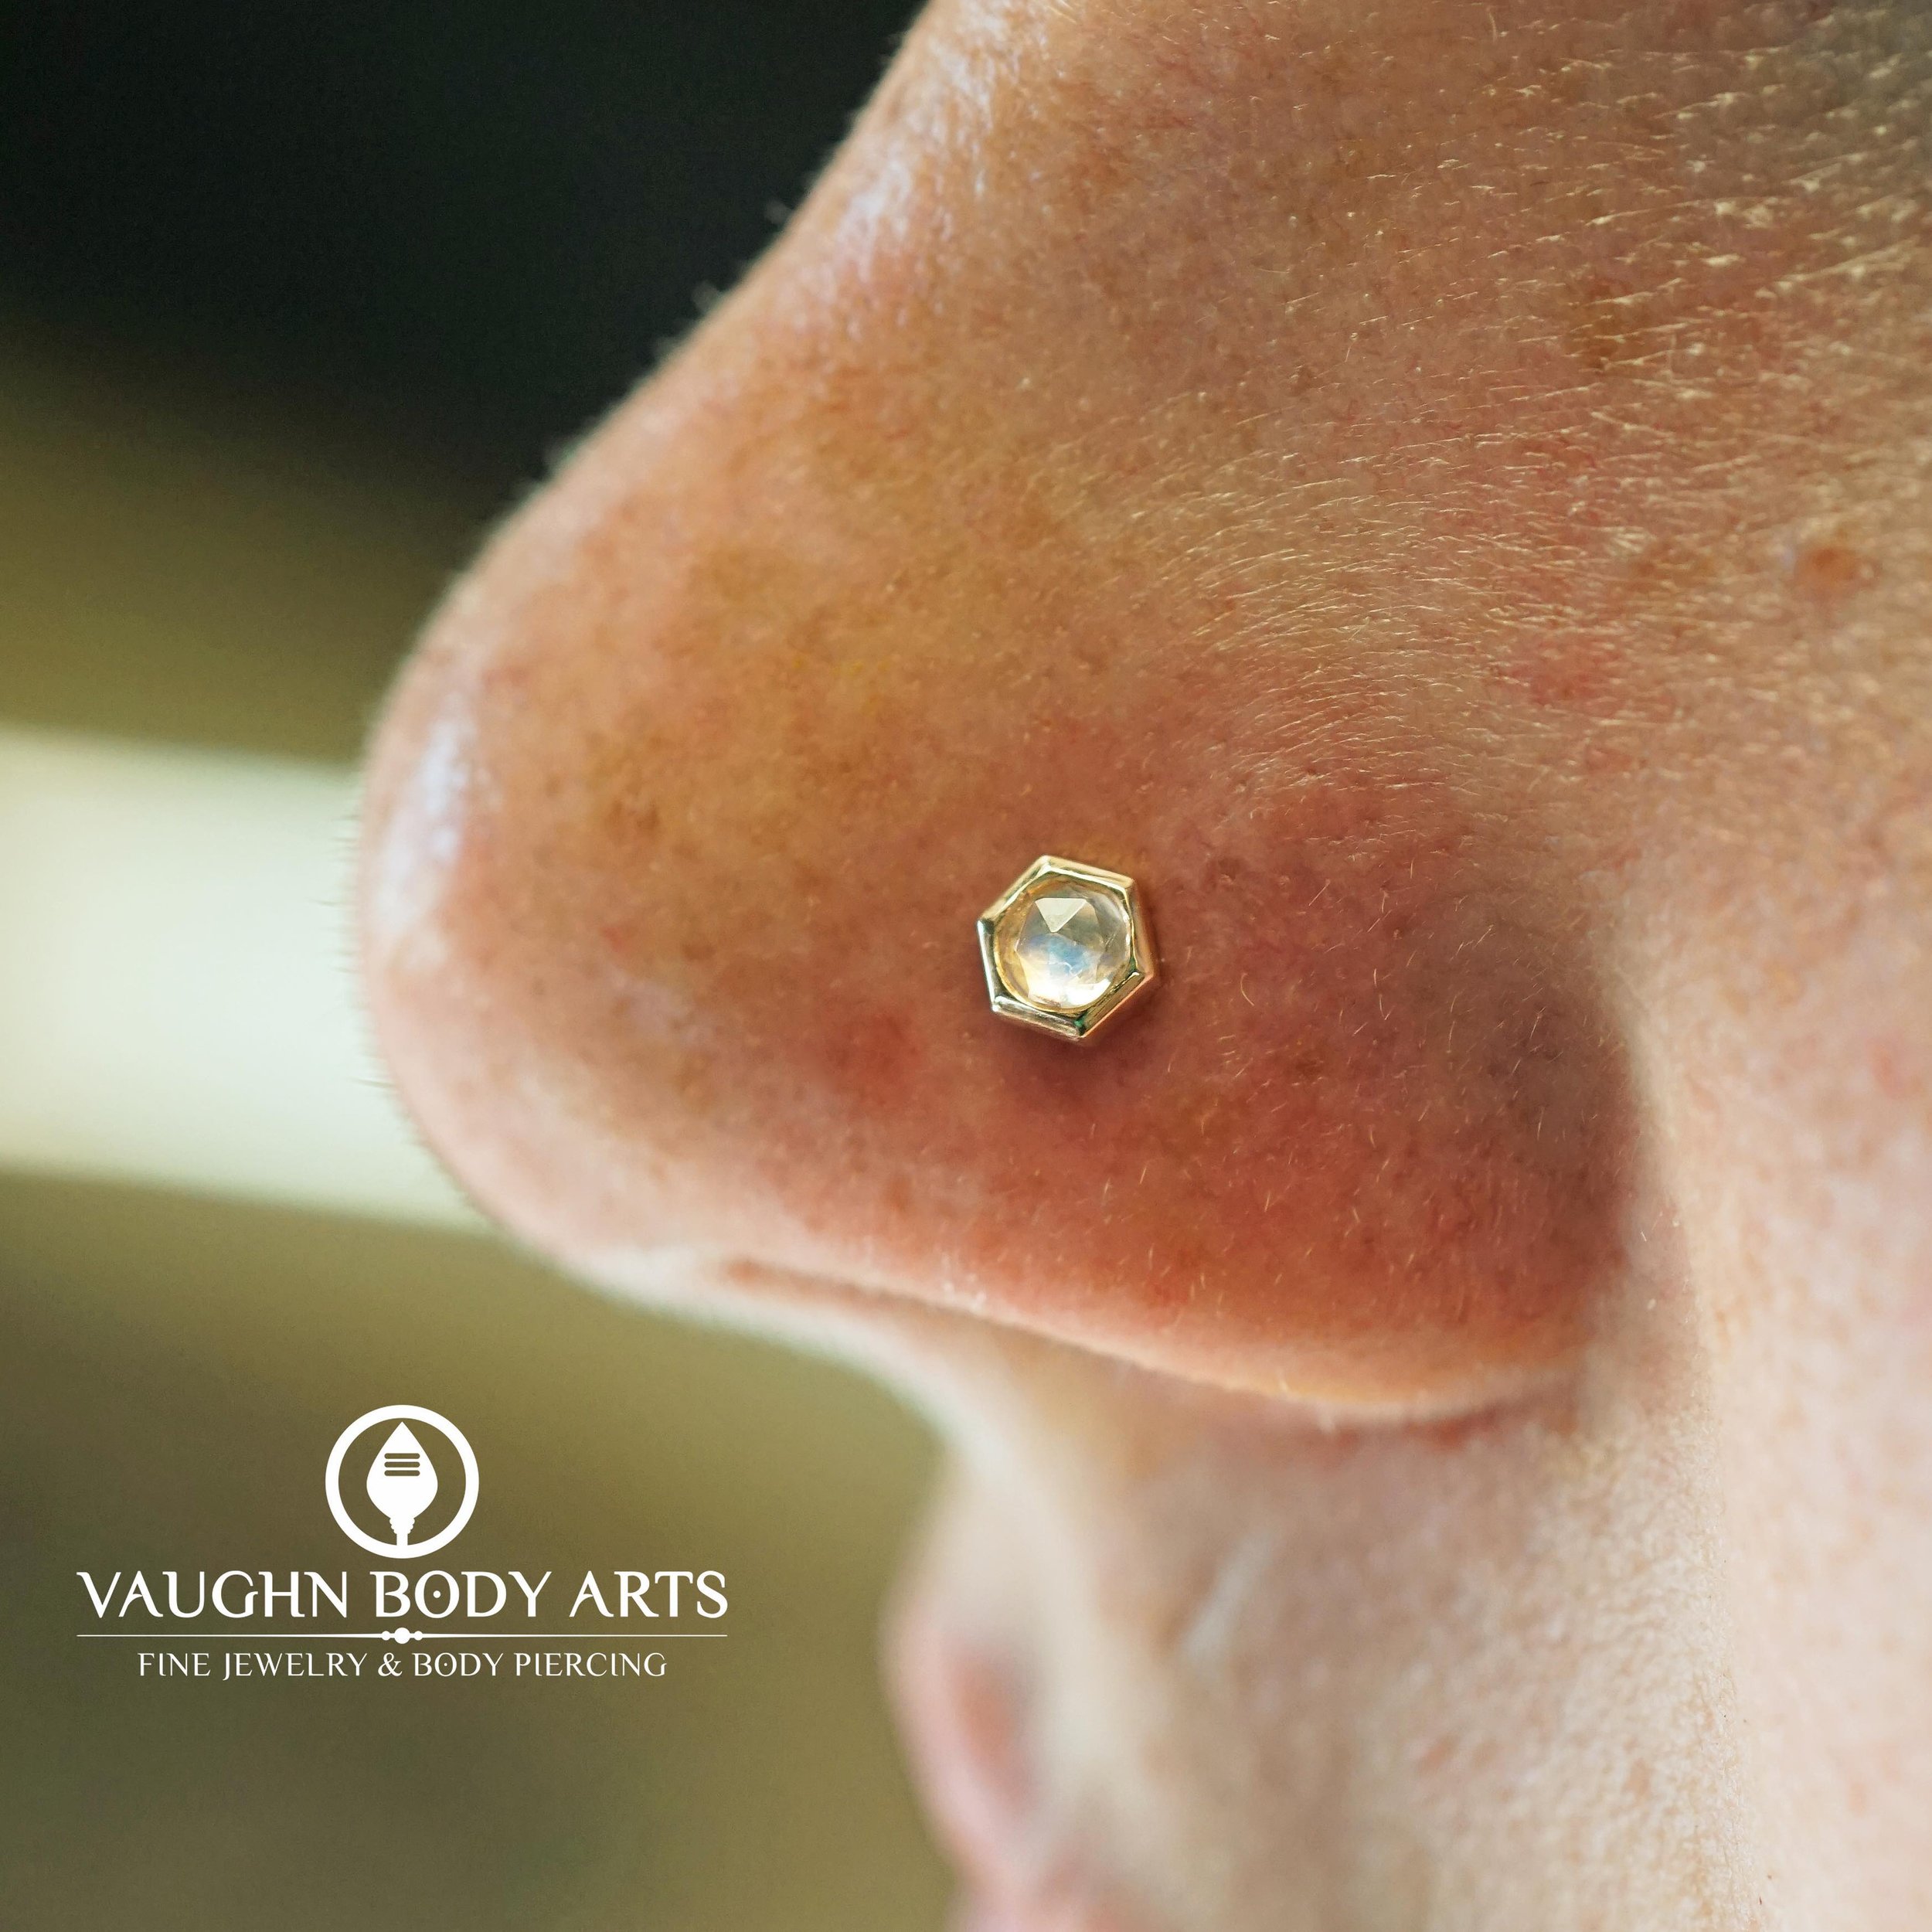 This adorable nose belongs to our wonderful client Mariel. 

We got to do this super cute nostril piercing for them a little while ago. She picked out this gorgeous Honeycomb with a rose-cut Rainbow Moonstone from BVLA. 

Thank you so much, Mariel!

